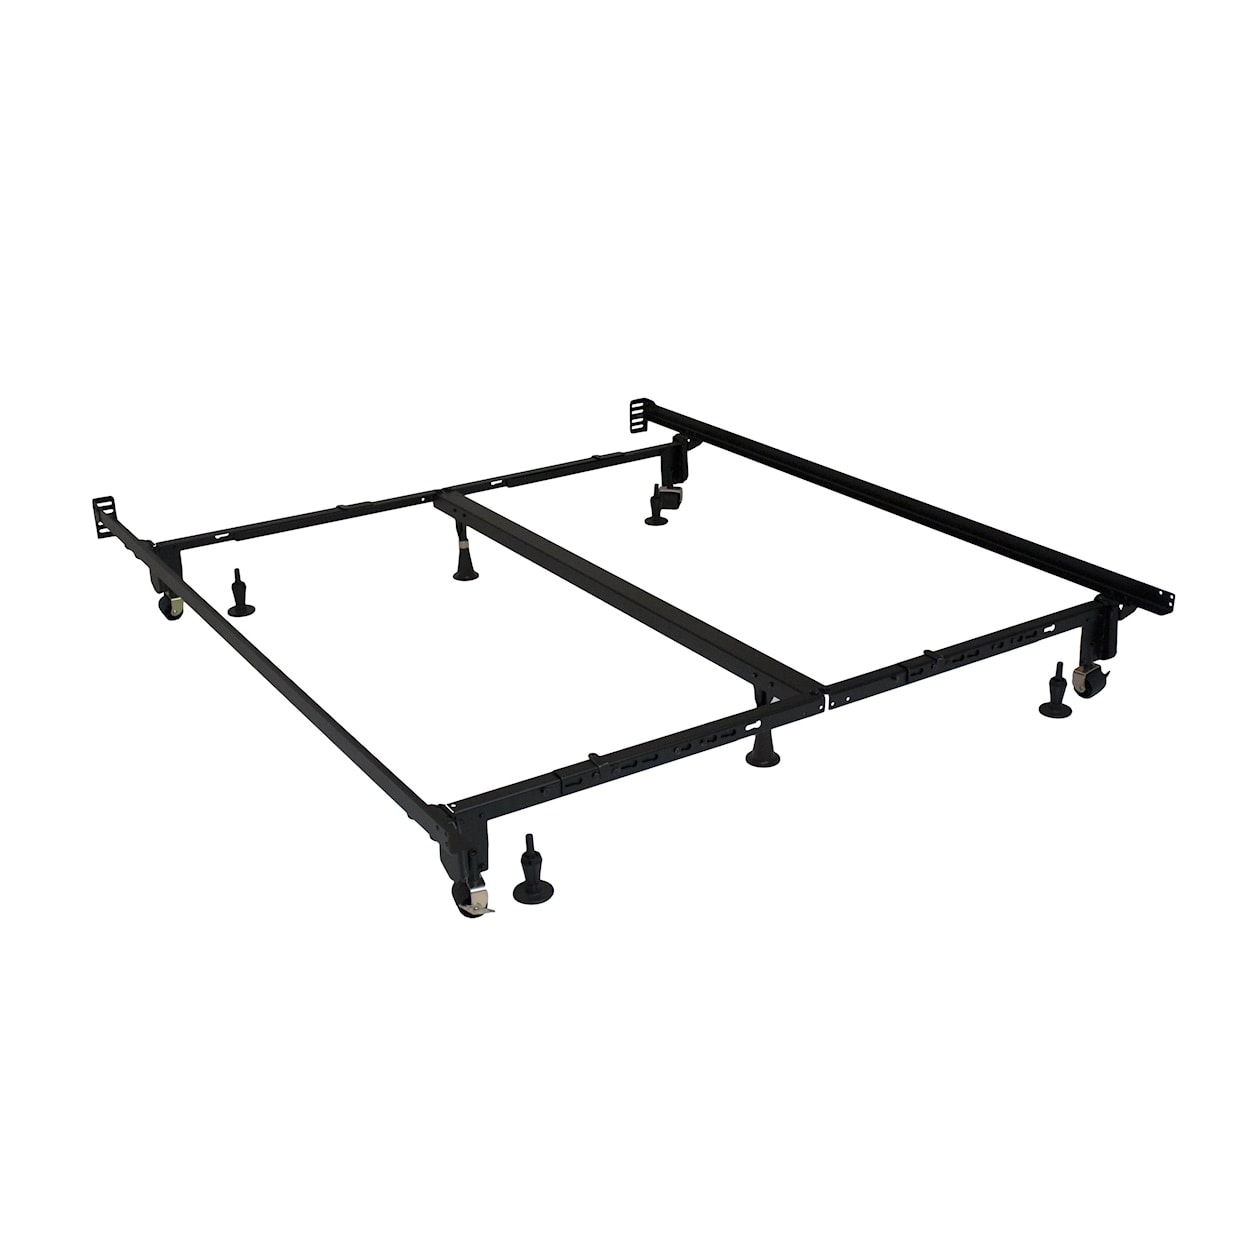 Hollywood Bed Frame Company Multi-Fit Matic Bed Frame